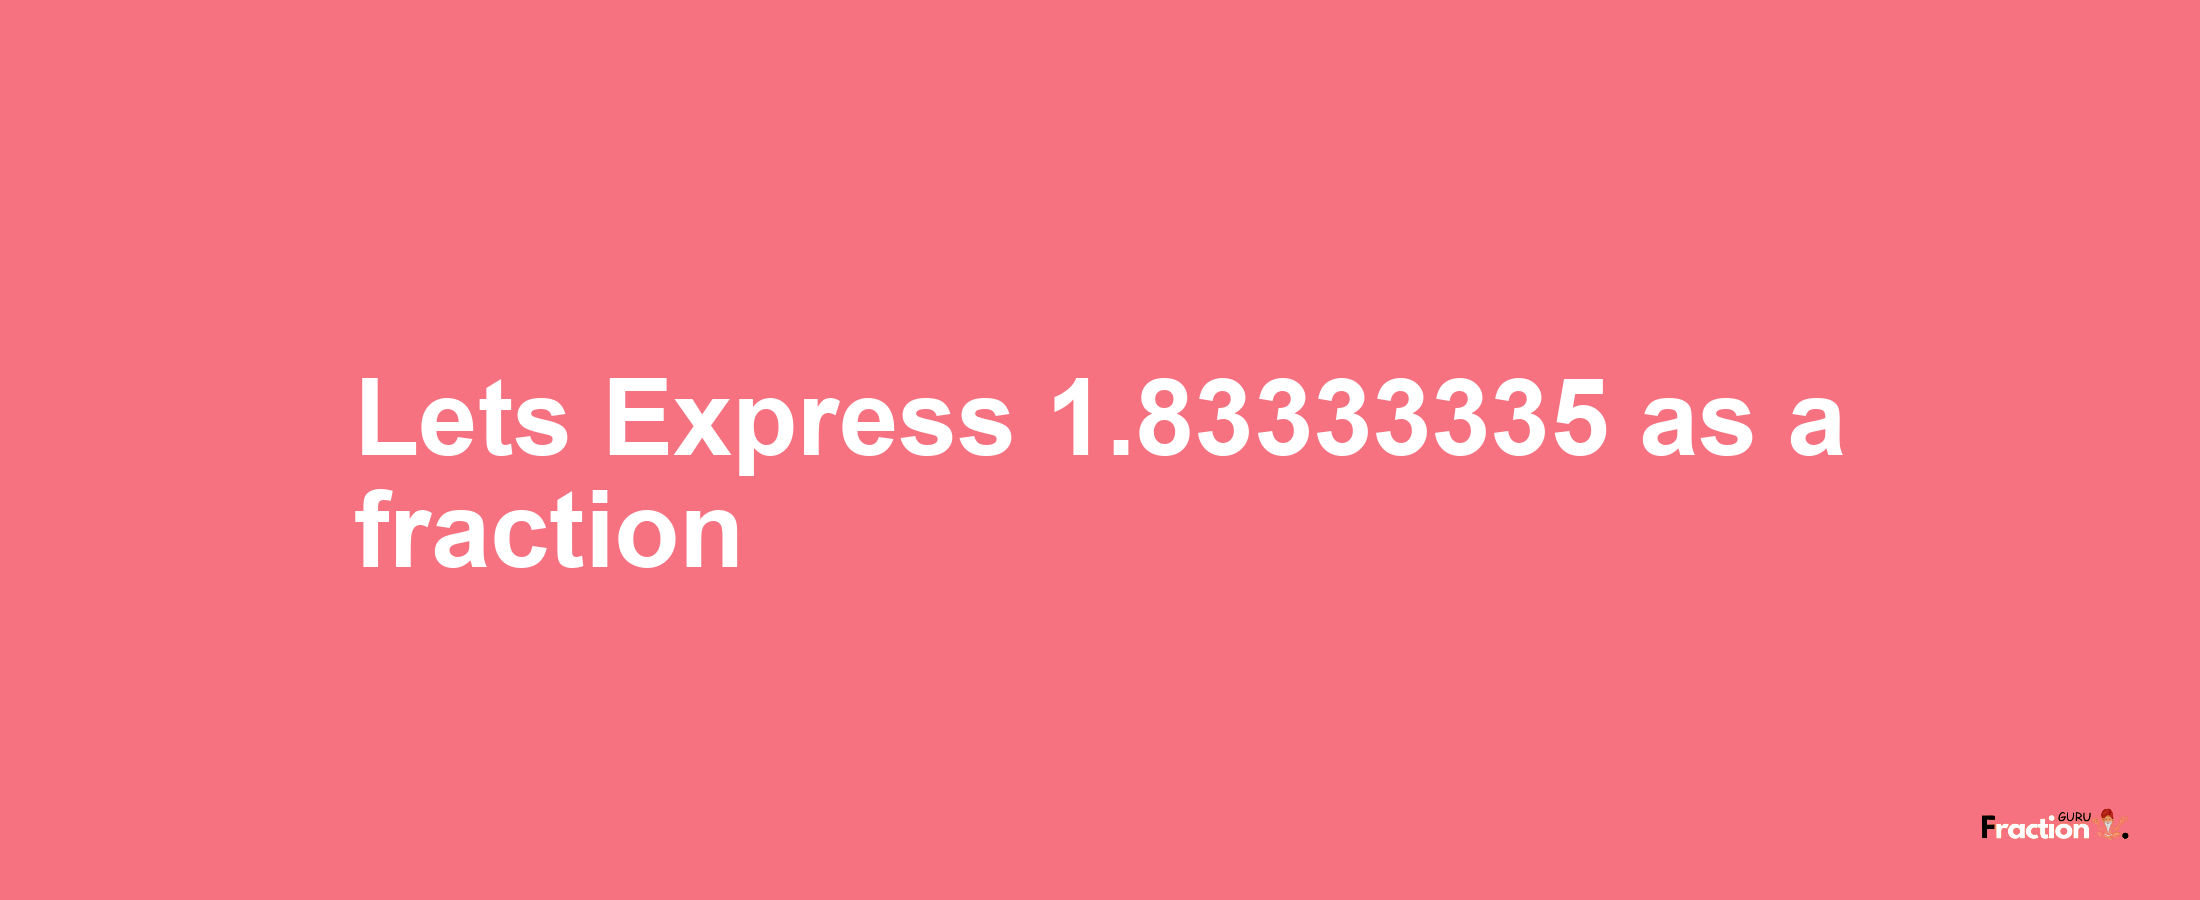 Lets Express 1.83333335 as afraction